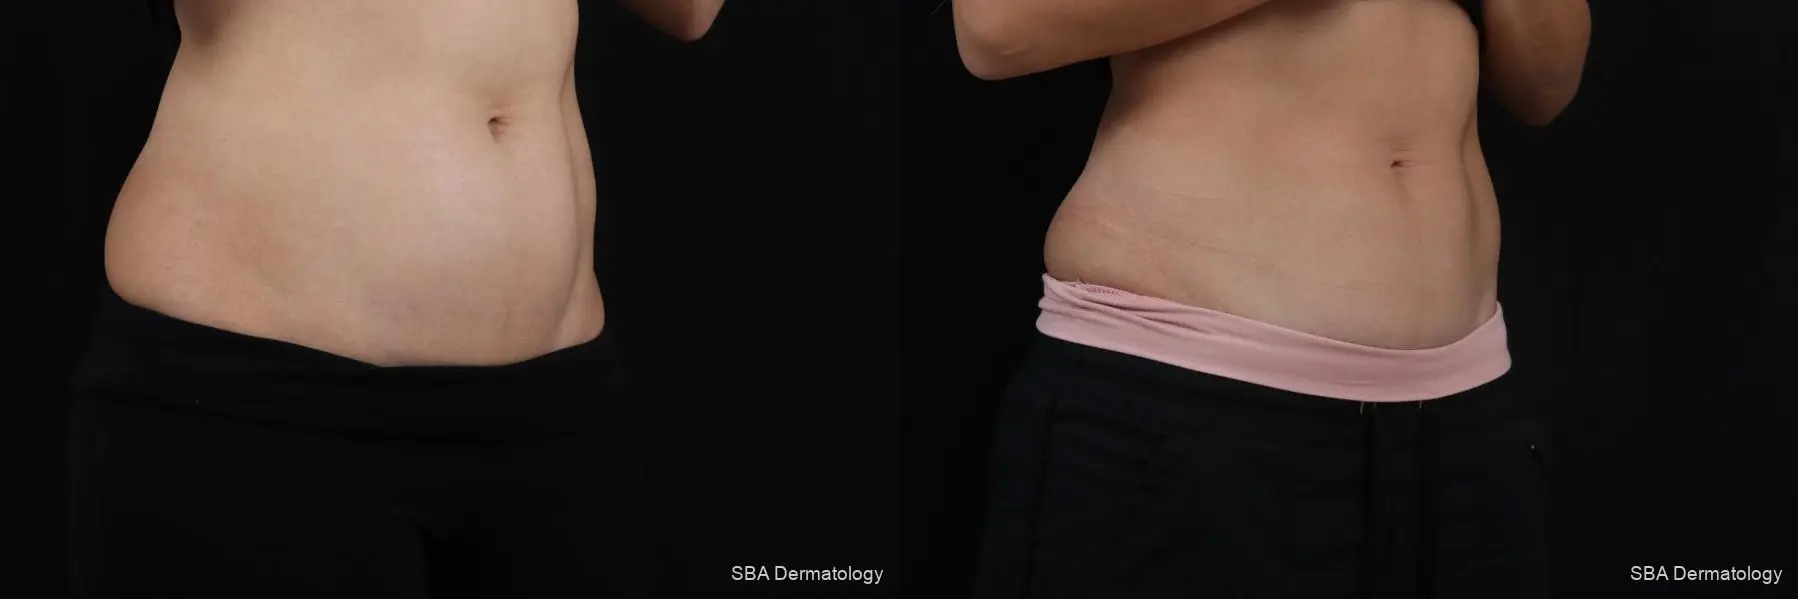 Coolsculpting: Patient 8 - Before and After 6